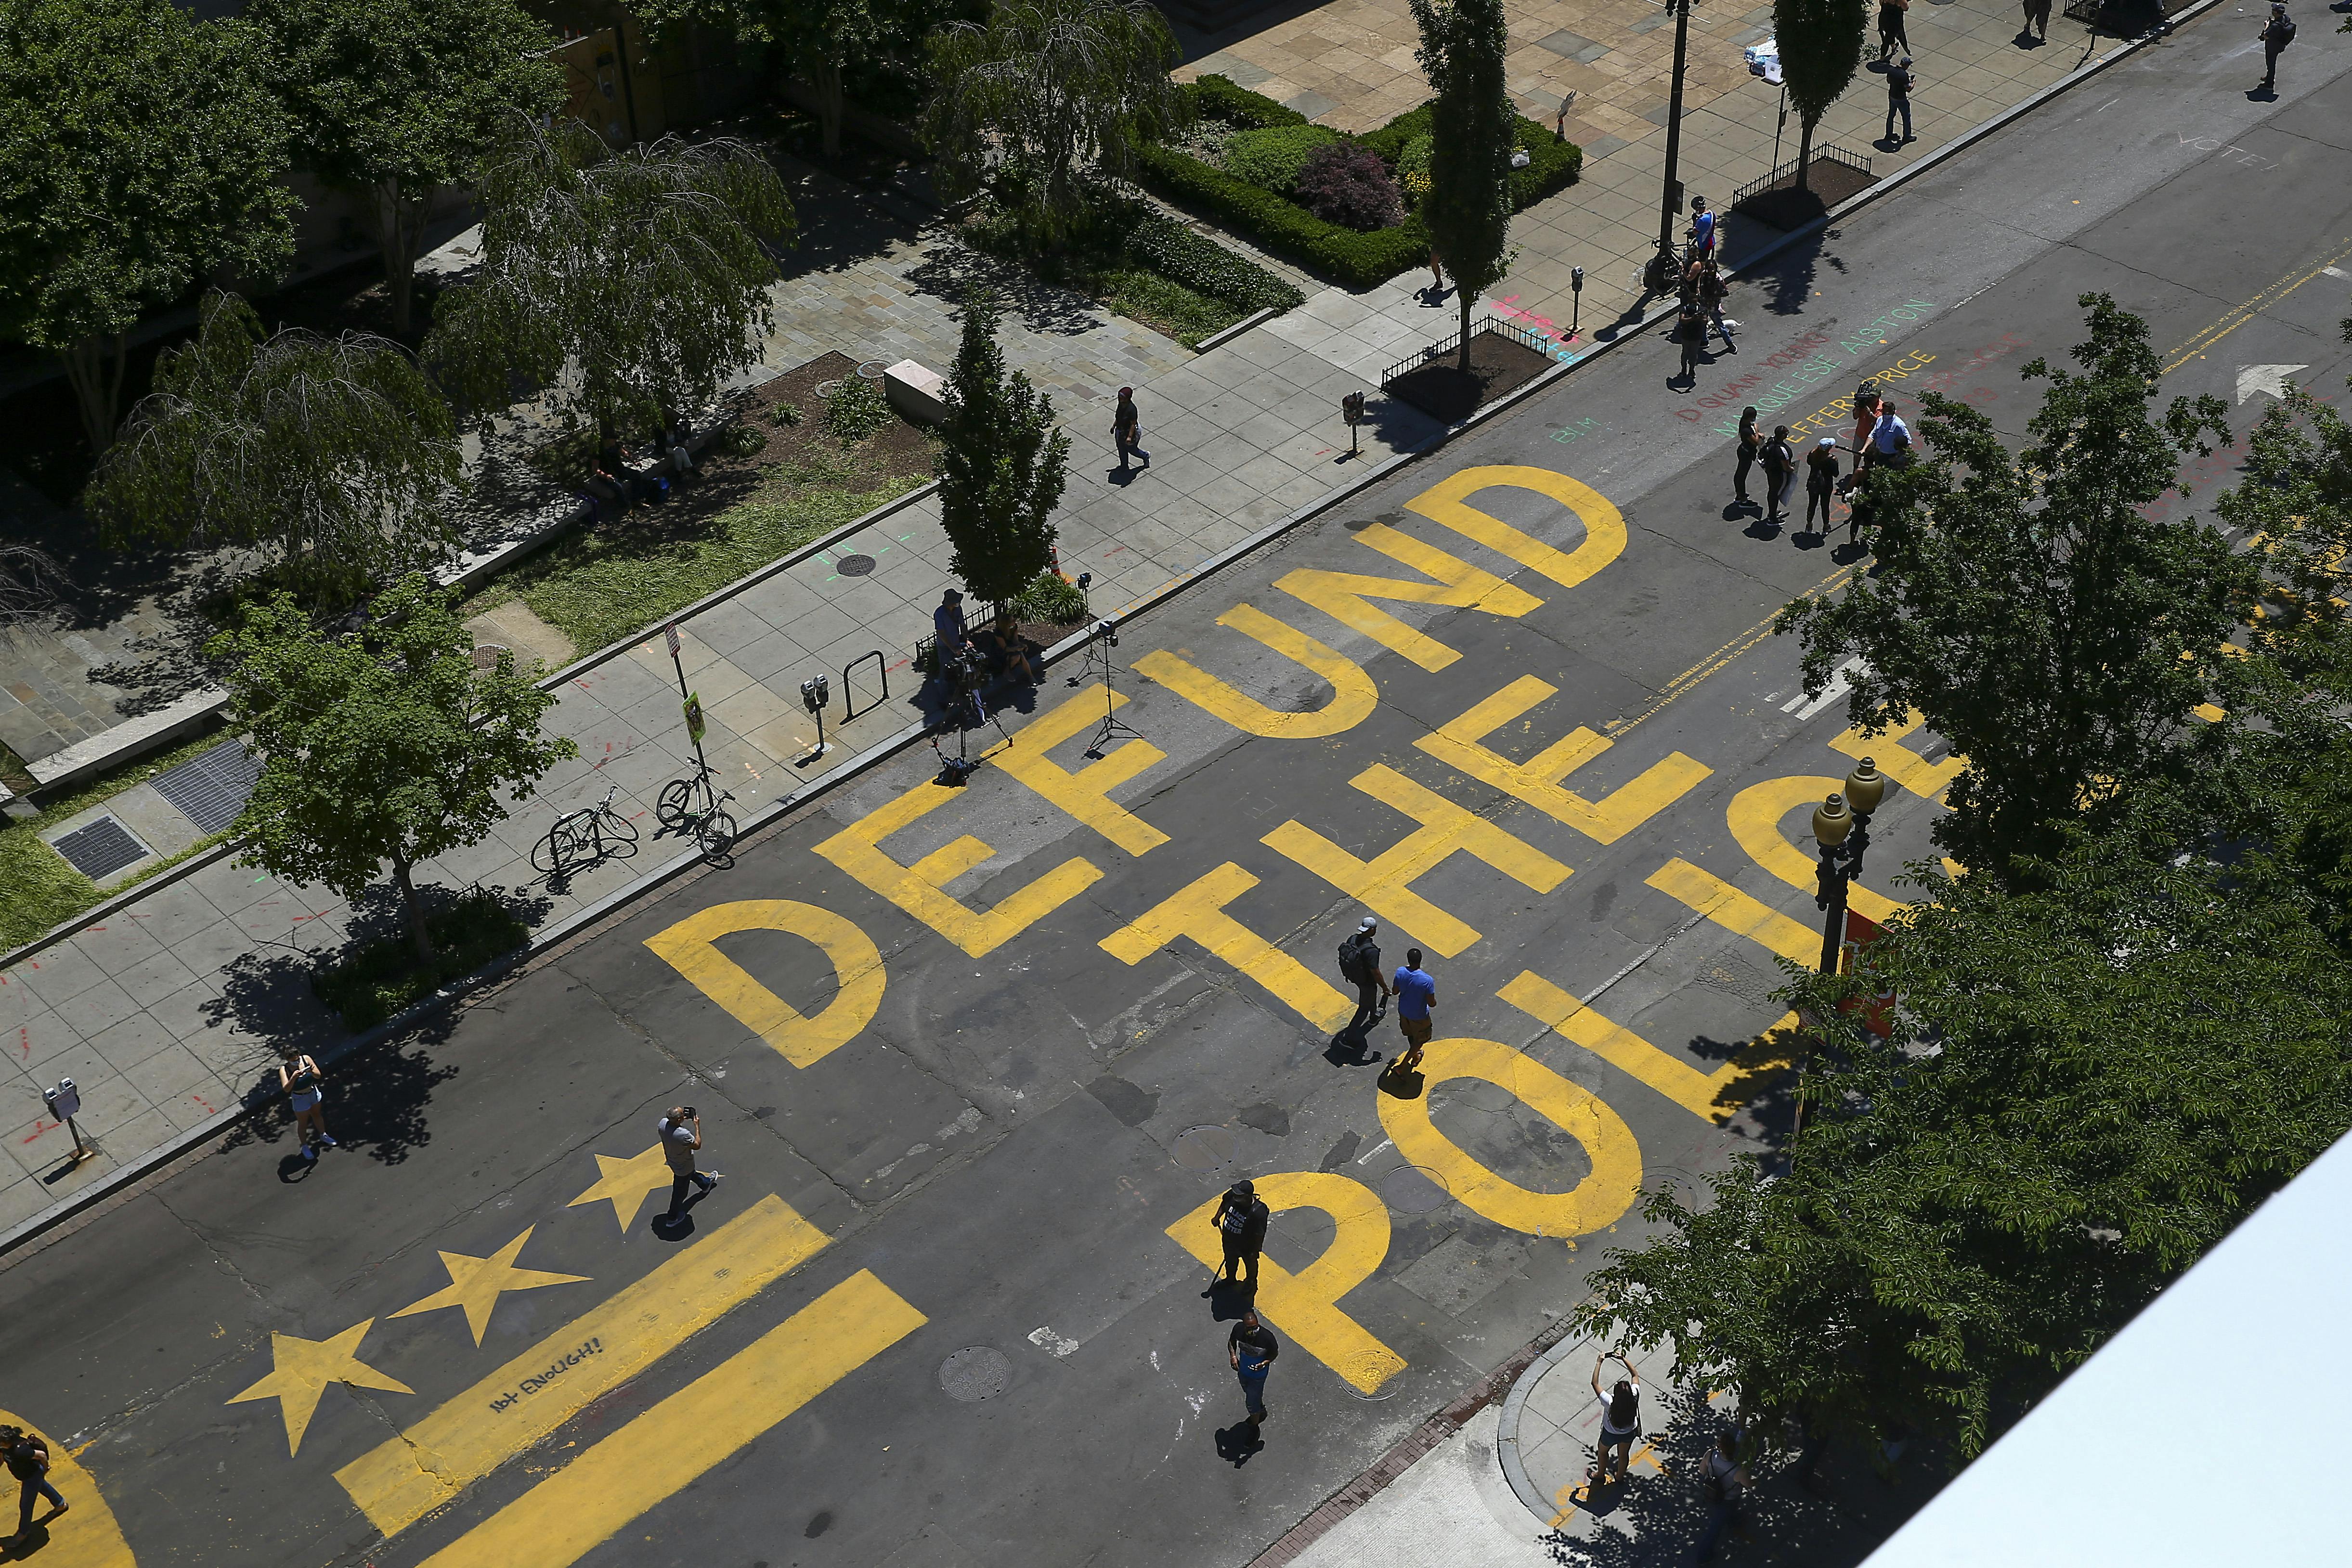 People walk down 16th street after “Defund The Police” was painted on the street near the White House on June 08, 2020 in Washington, DC. After days of protests in DC over the death of George Floyd, DC Mayor Muriel Bowser has renamed that section of 16th street "Black Lives Matter Plaza".